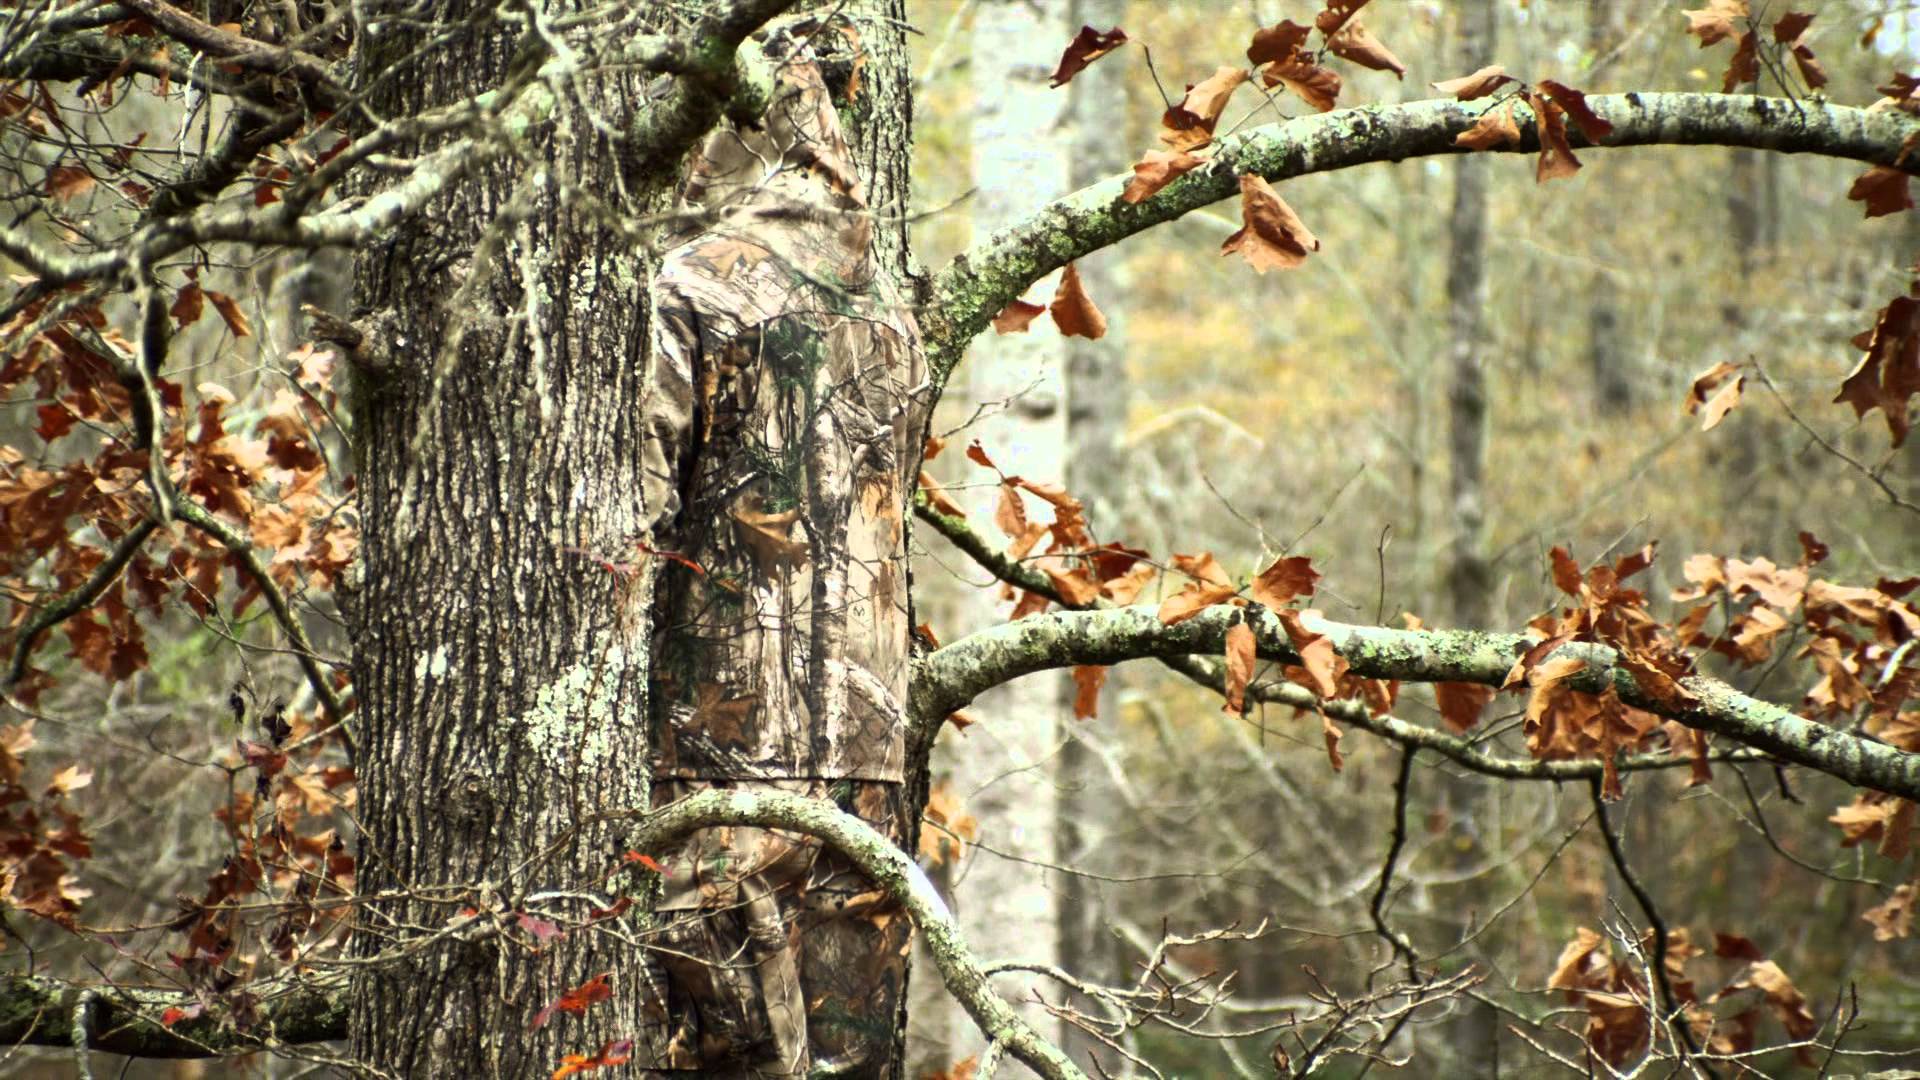 Realtree Camo Wallpaper Hd Images Pictures   Becuo 1920x1080